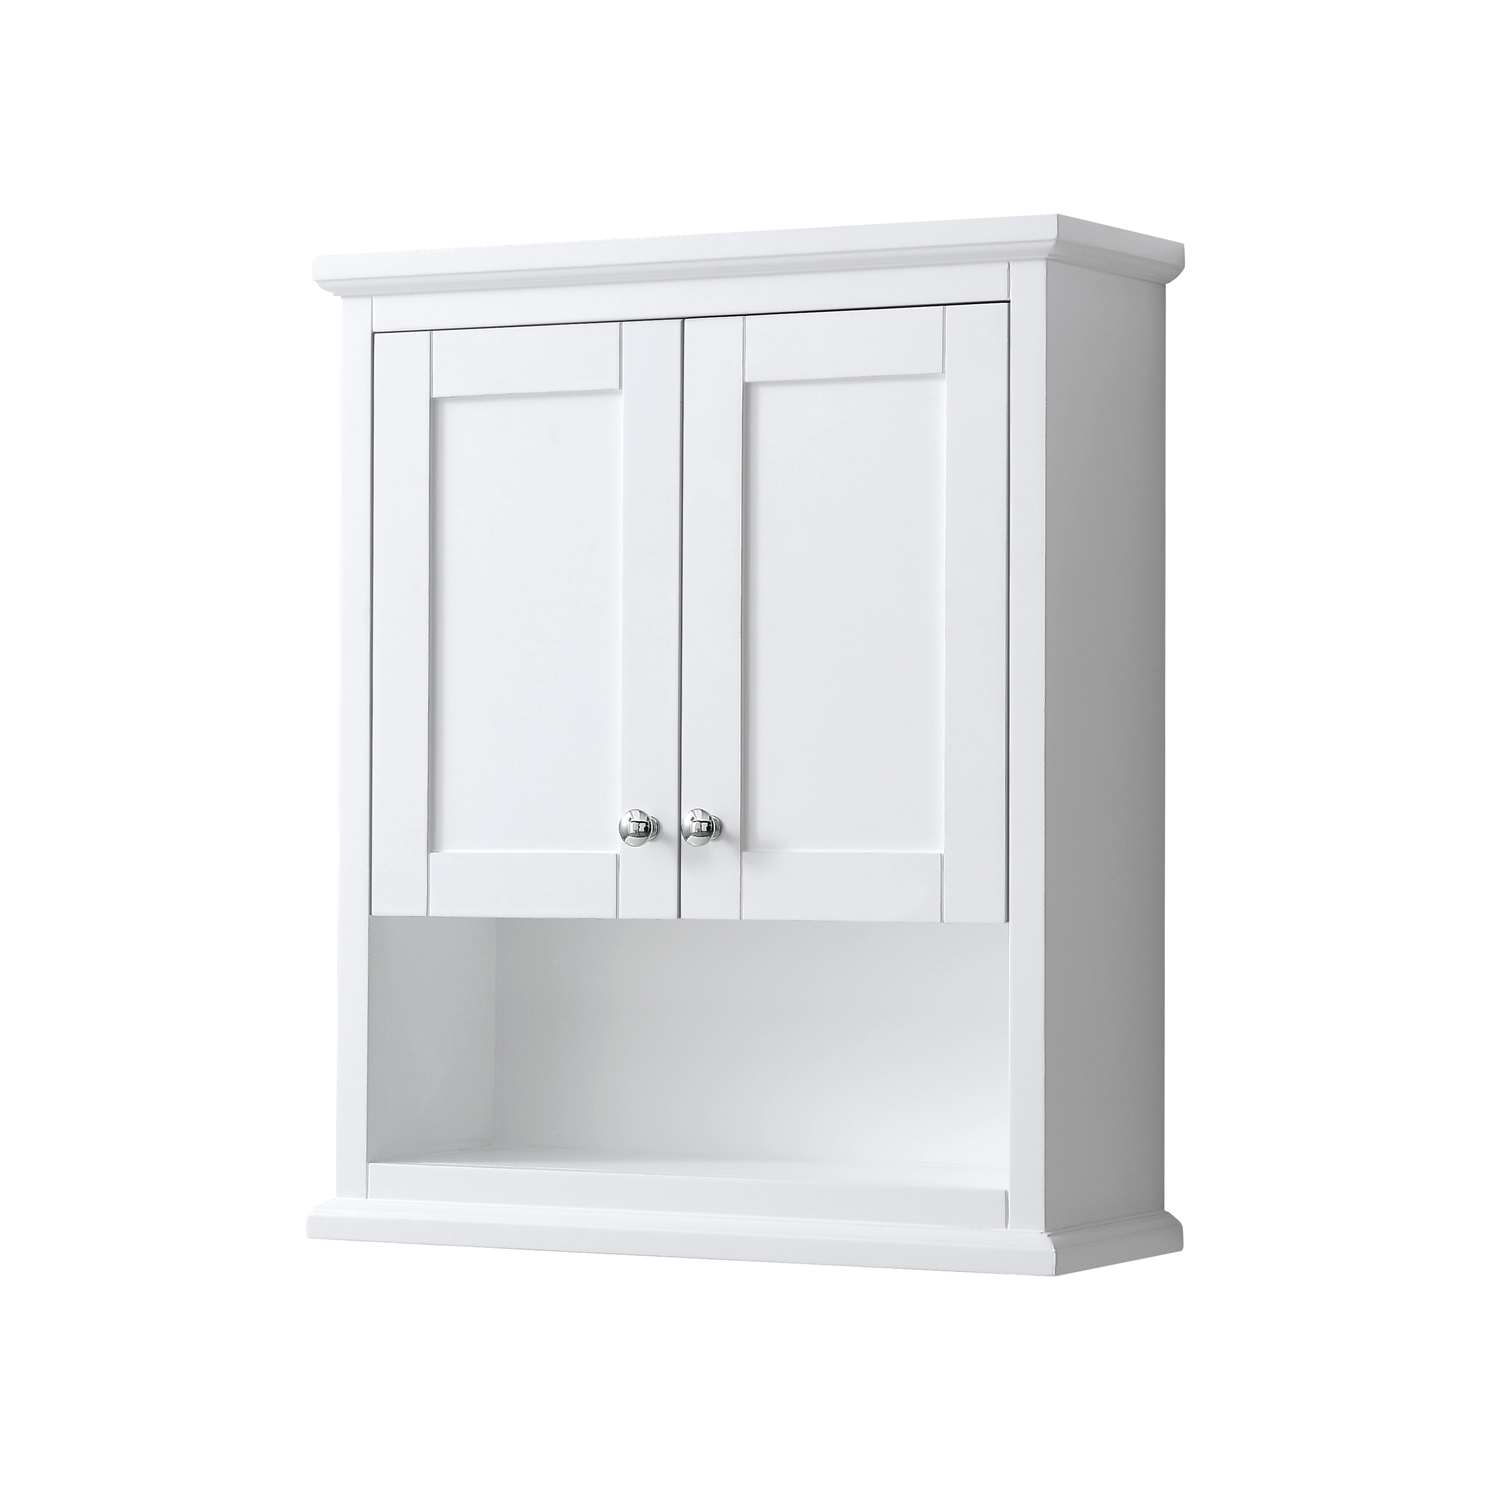 Avery Over-Toilet Wall Cabinet by Wyndham Collection - White WC-2323-WC-WHT